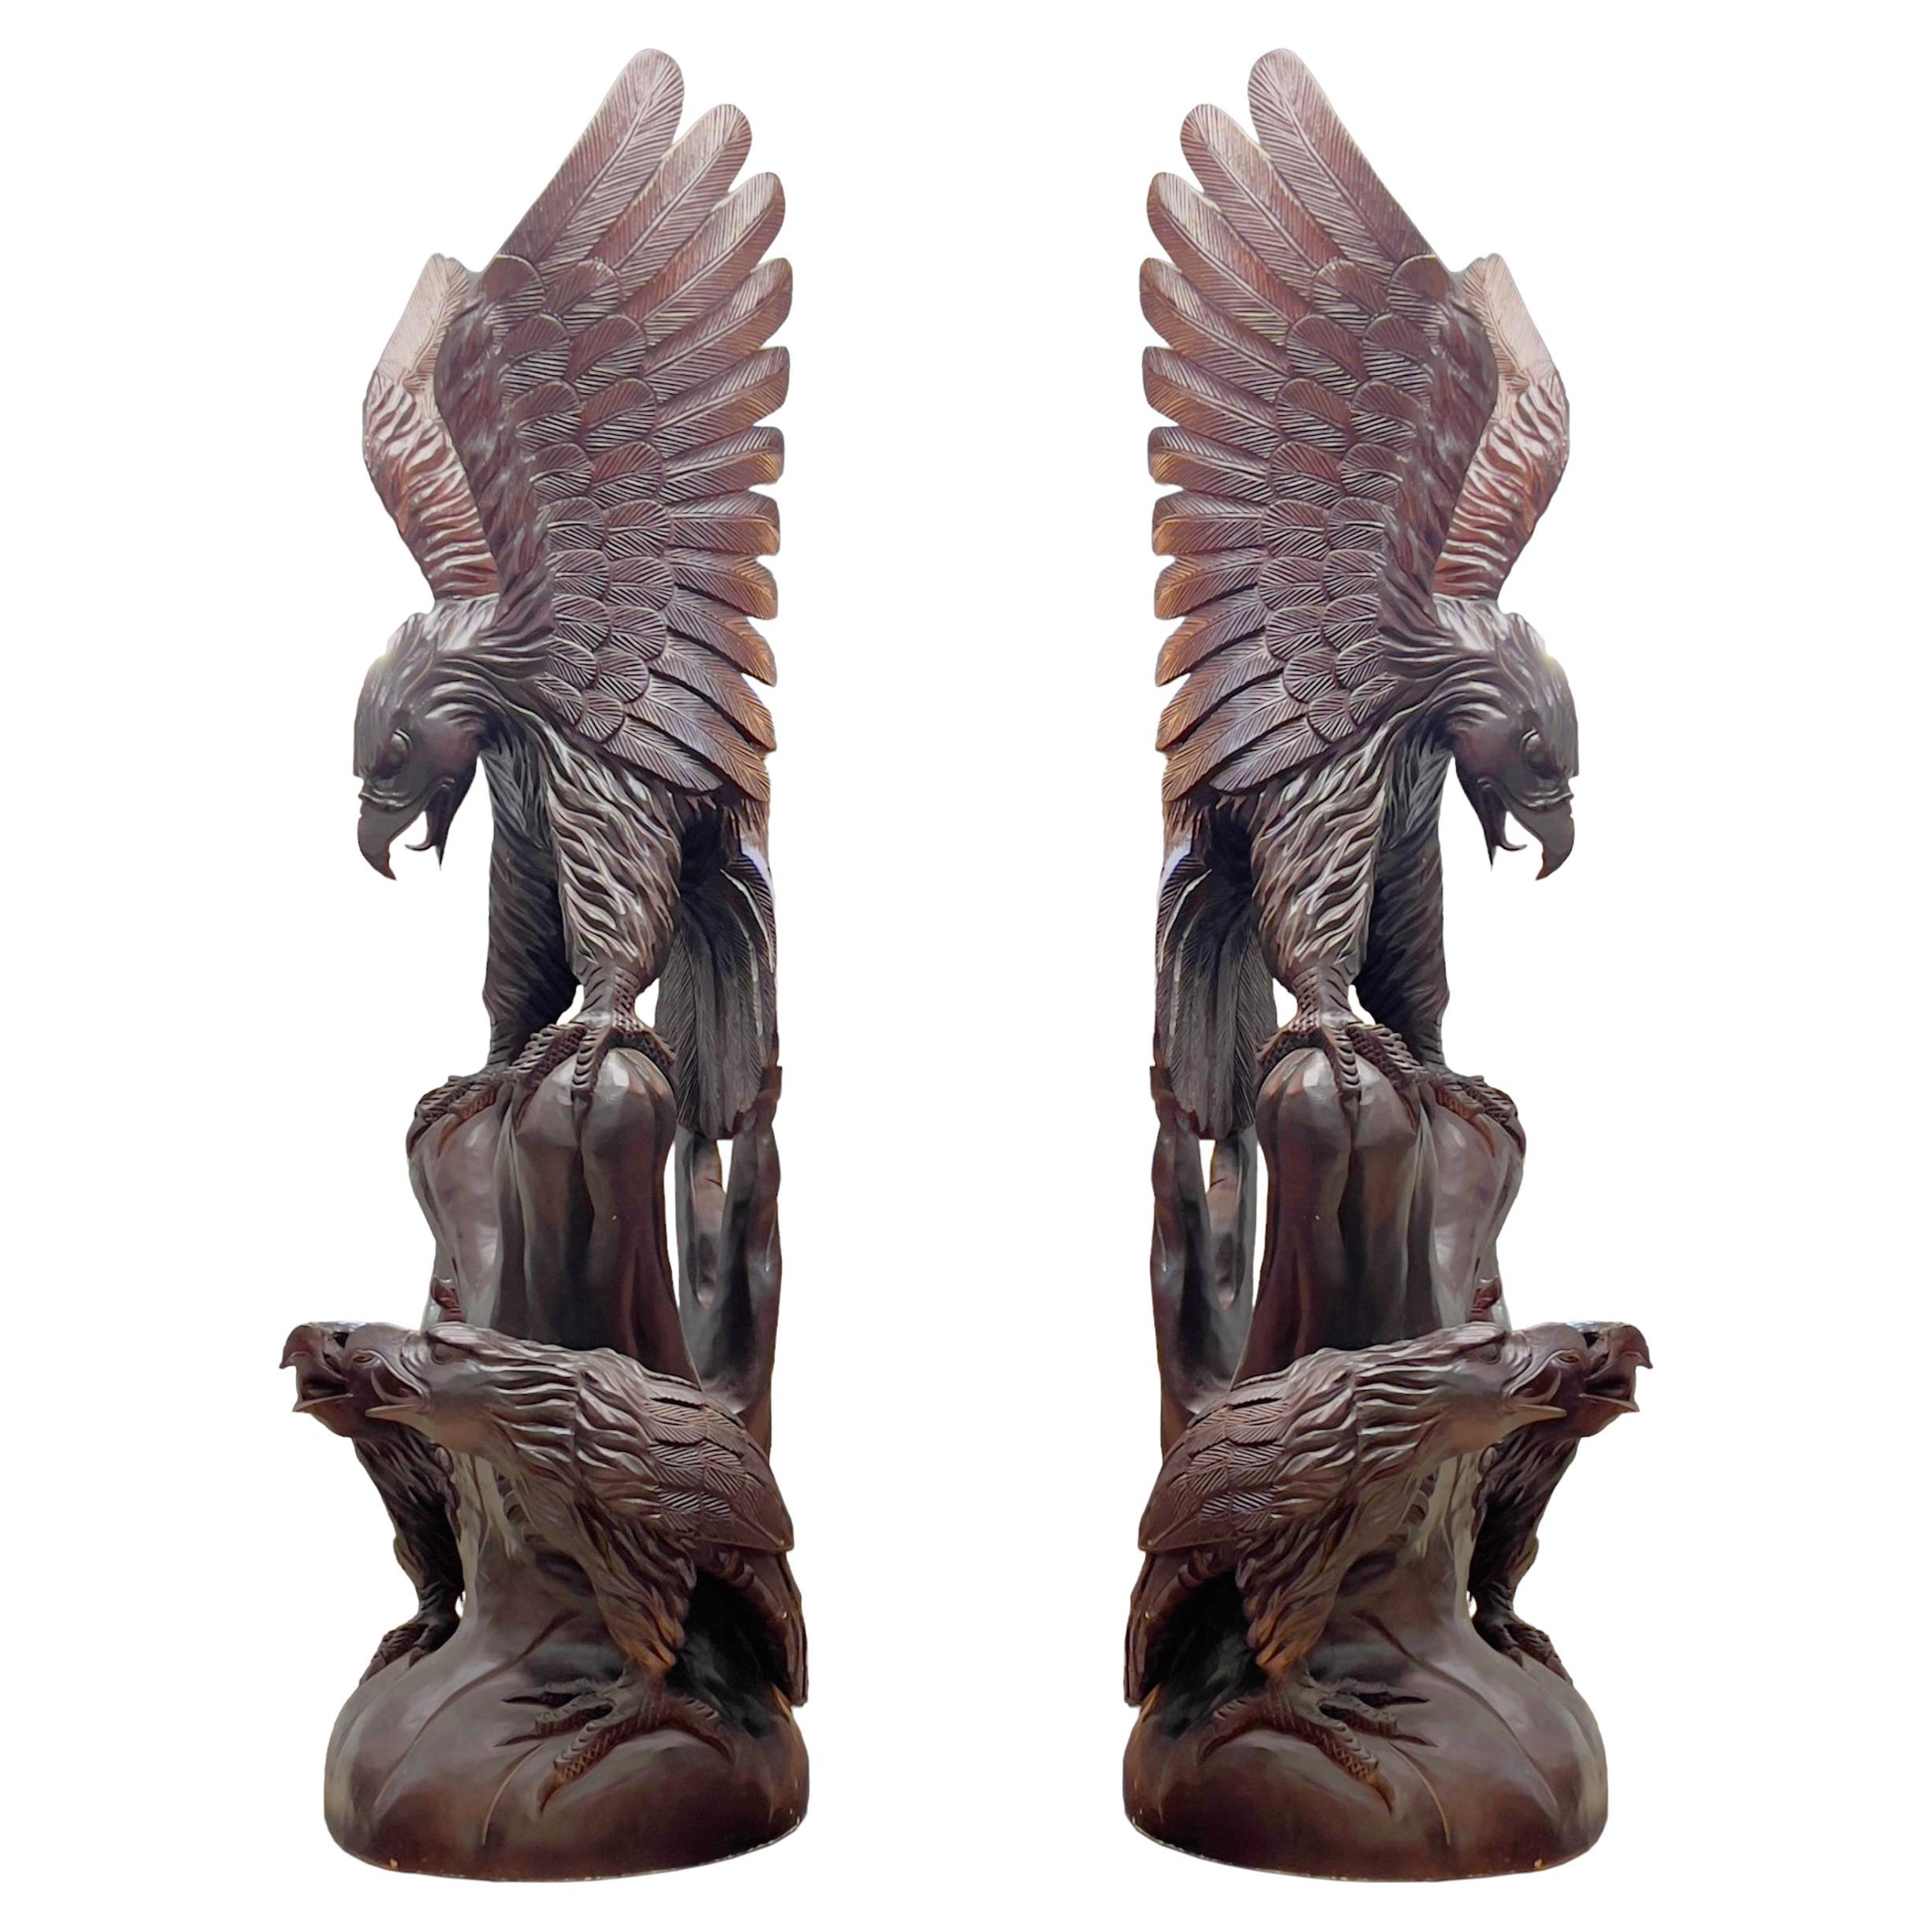 Pair Monumental Chinese Carved Wooden Eagle Statues